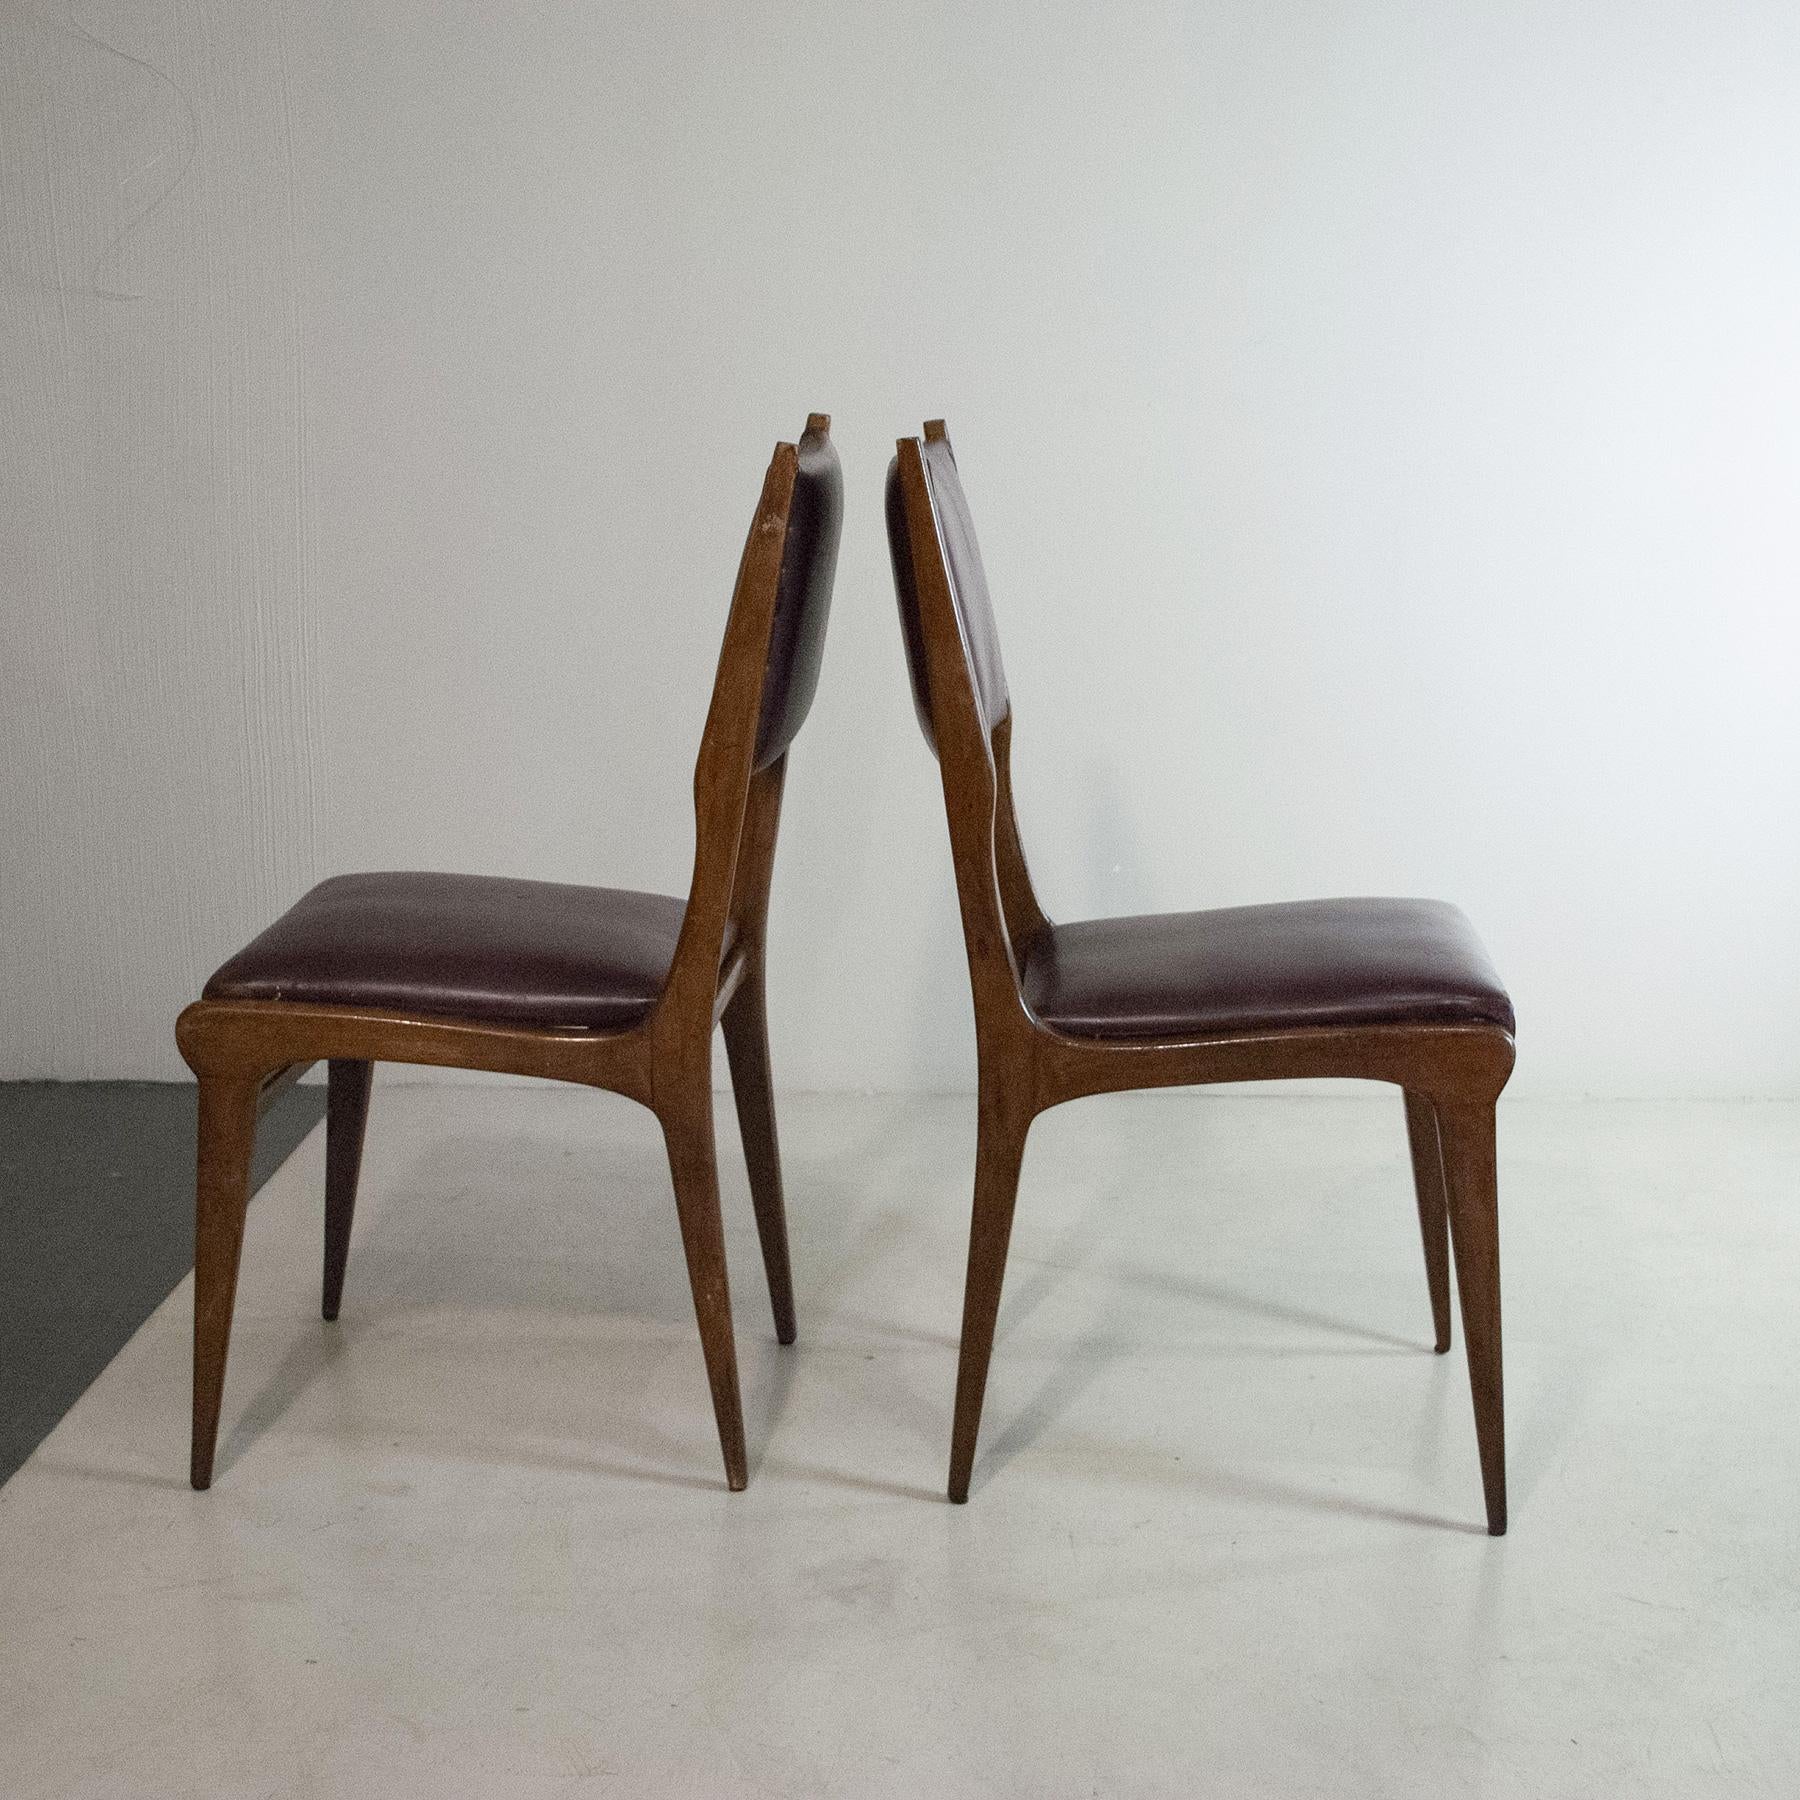 Carlo de Carli in the Style Italian Midcentury Chairs For Sale 6